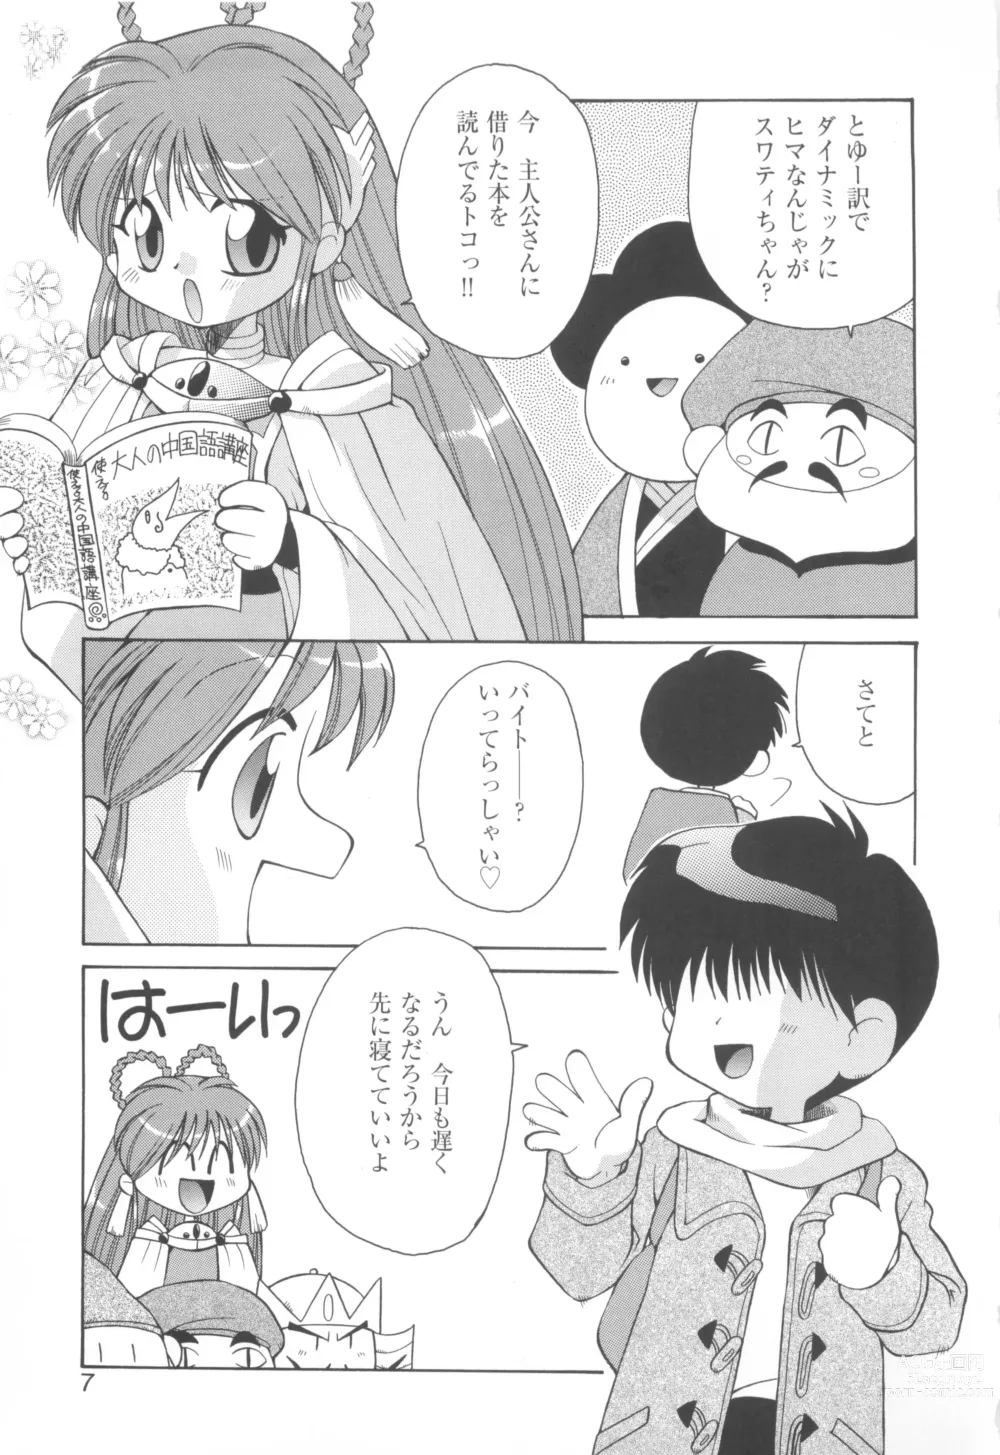 Page 9 of manga CAN CAN BUNNY ANTHOLOGY COMIC 2